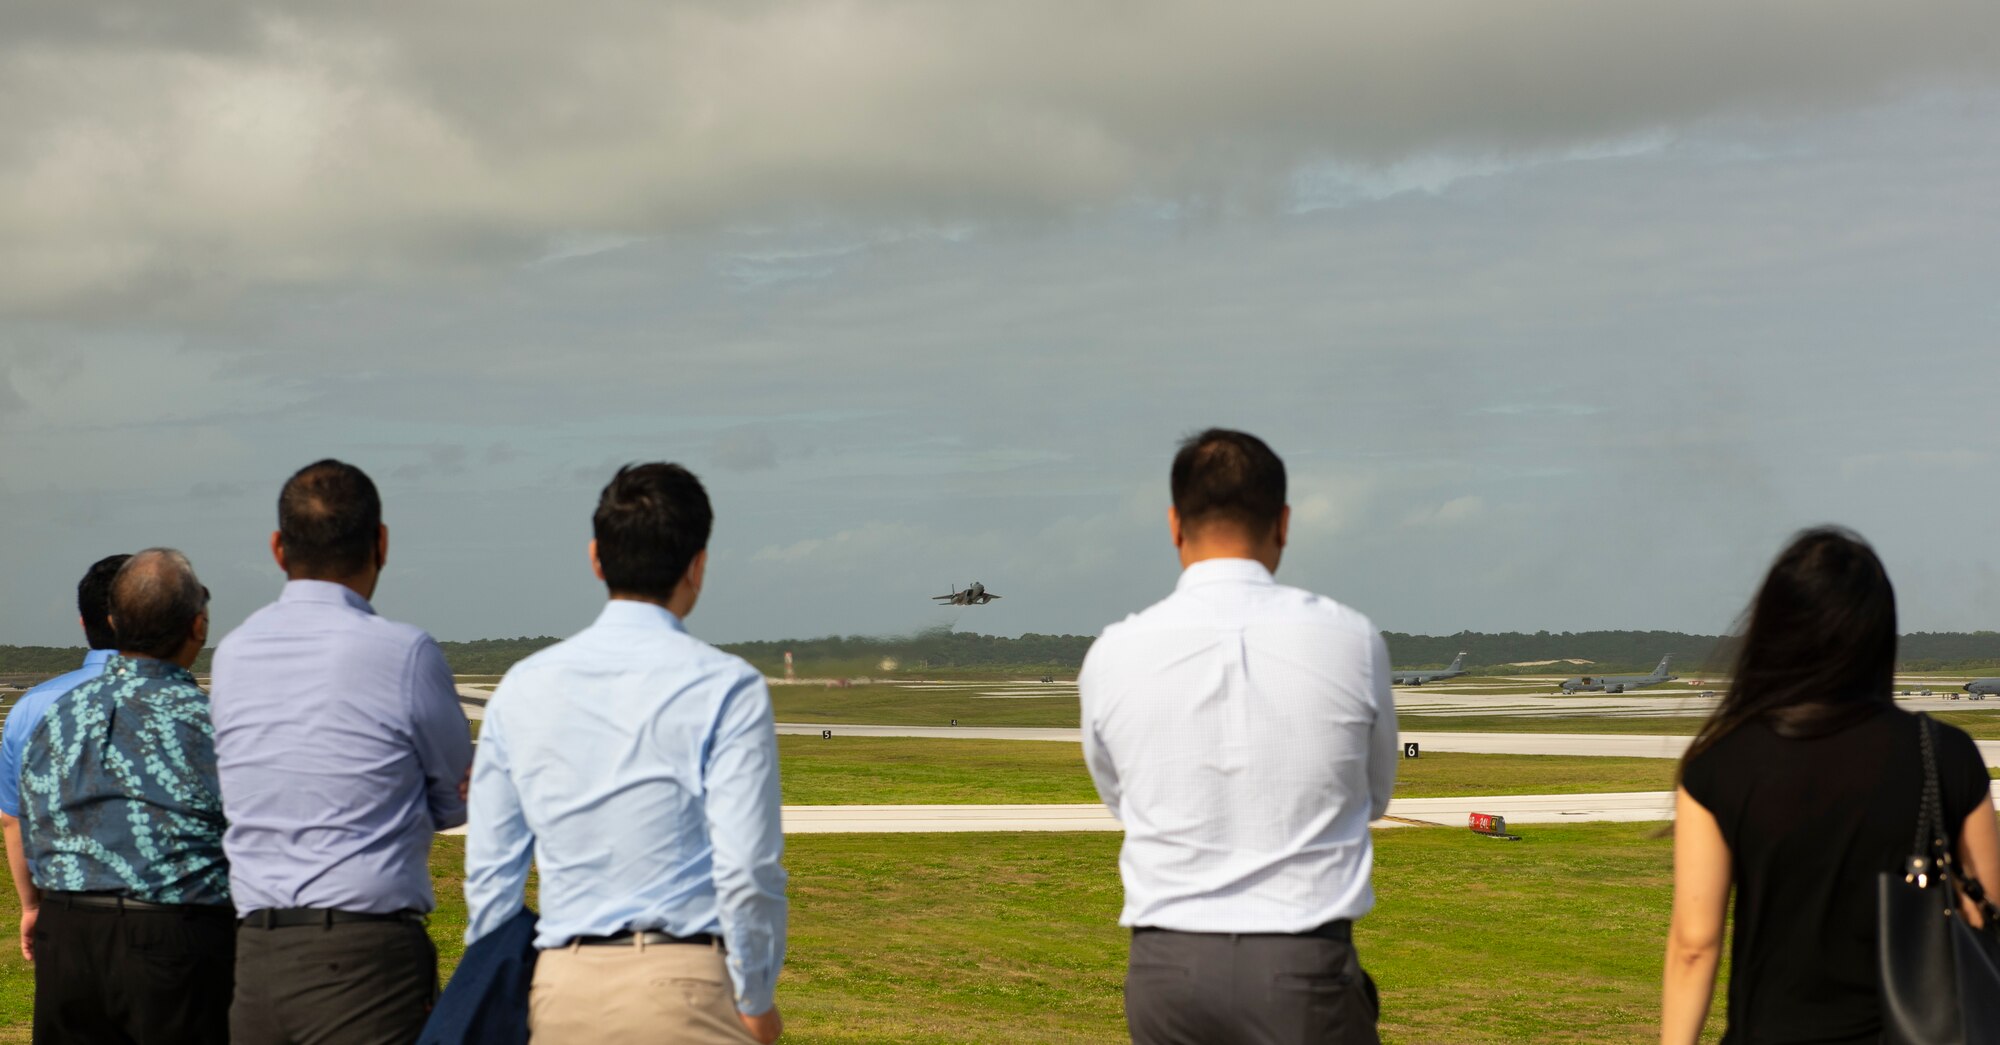 Spectators from the local community watch aircraft take off from Andersen Air Force Base, Guam, during a take-off viewing day for exercise Cope North 22, Feb. 15, 2022. Service members, their families, and local hotel managers and workers were invited to the flight line to learn the importance of Cope North while observing aircraft capabilities.  Exercise Cope North is the U.S. Pacific Air Forces’ largest multilateral exercise and includes more than 2,500 U.S. Airmen, Marines, and Sailors working alongside 1,000 combined Japan Air Self-Defense Force and Royal Australian Air Force counterparts. (U.S. Air Force Photo by Senior Airman Helena Owens)